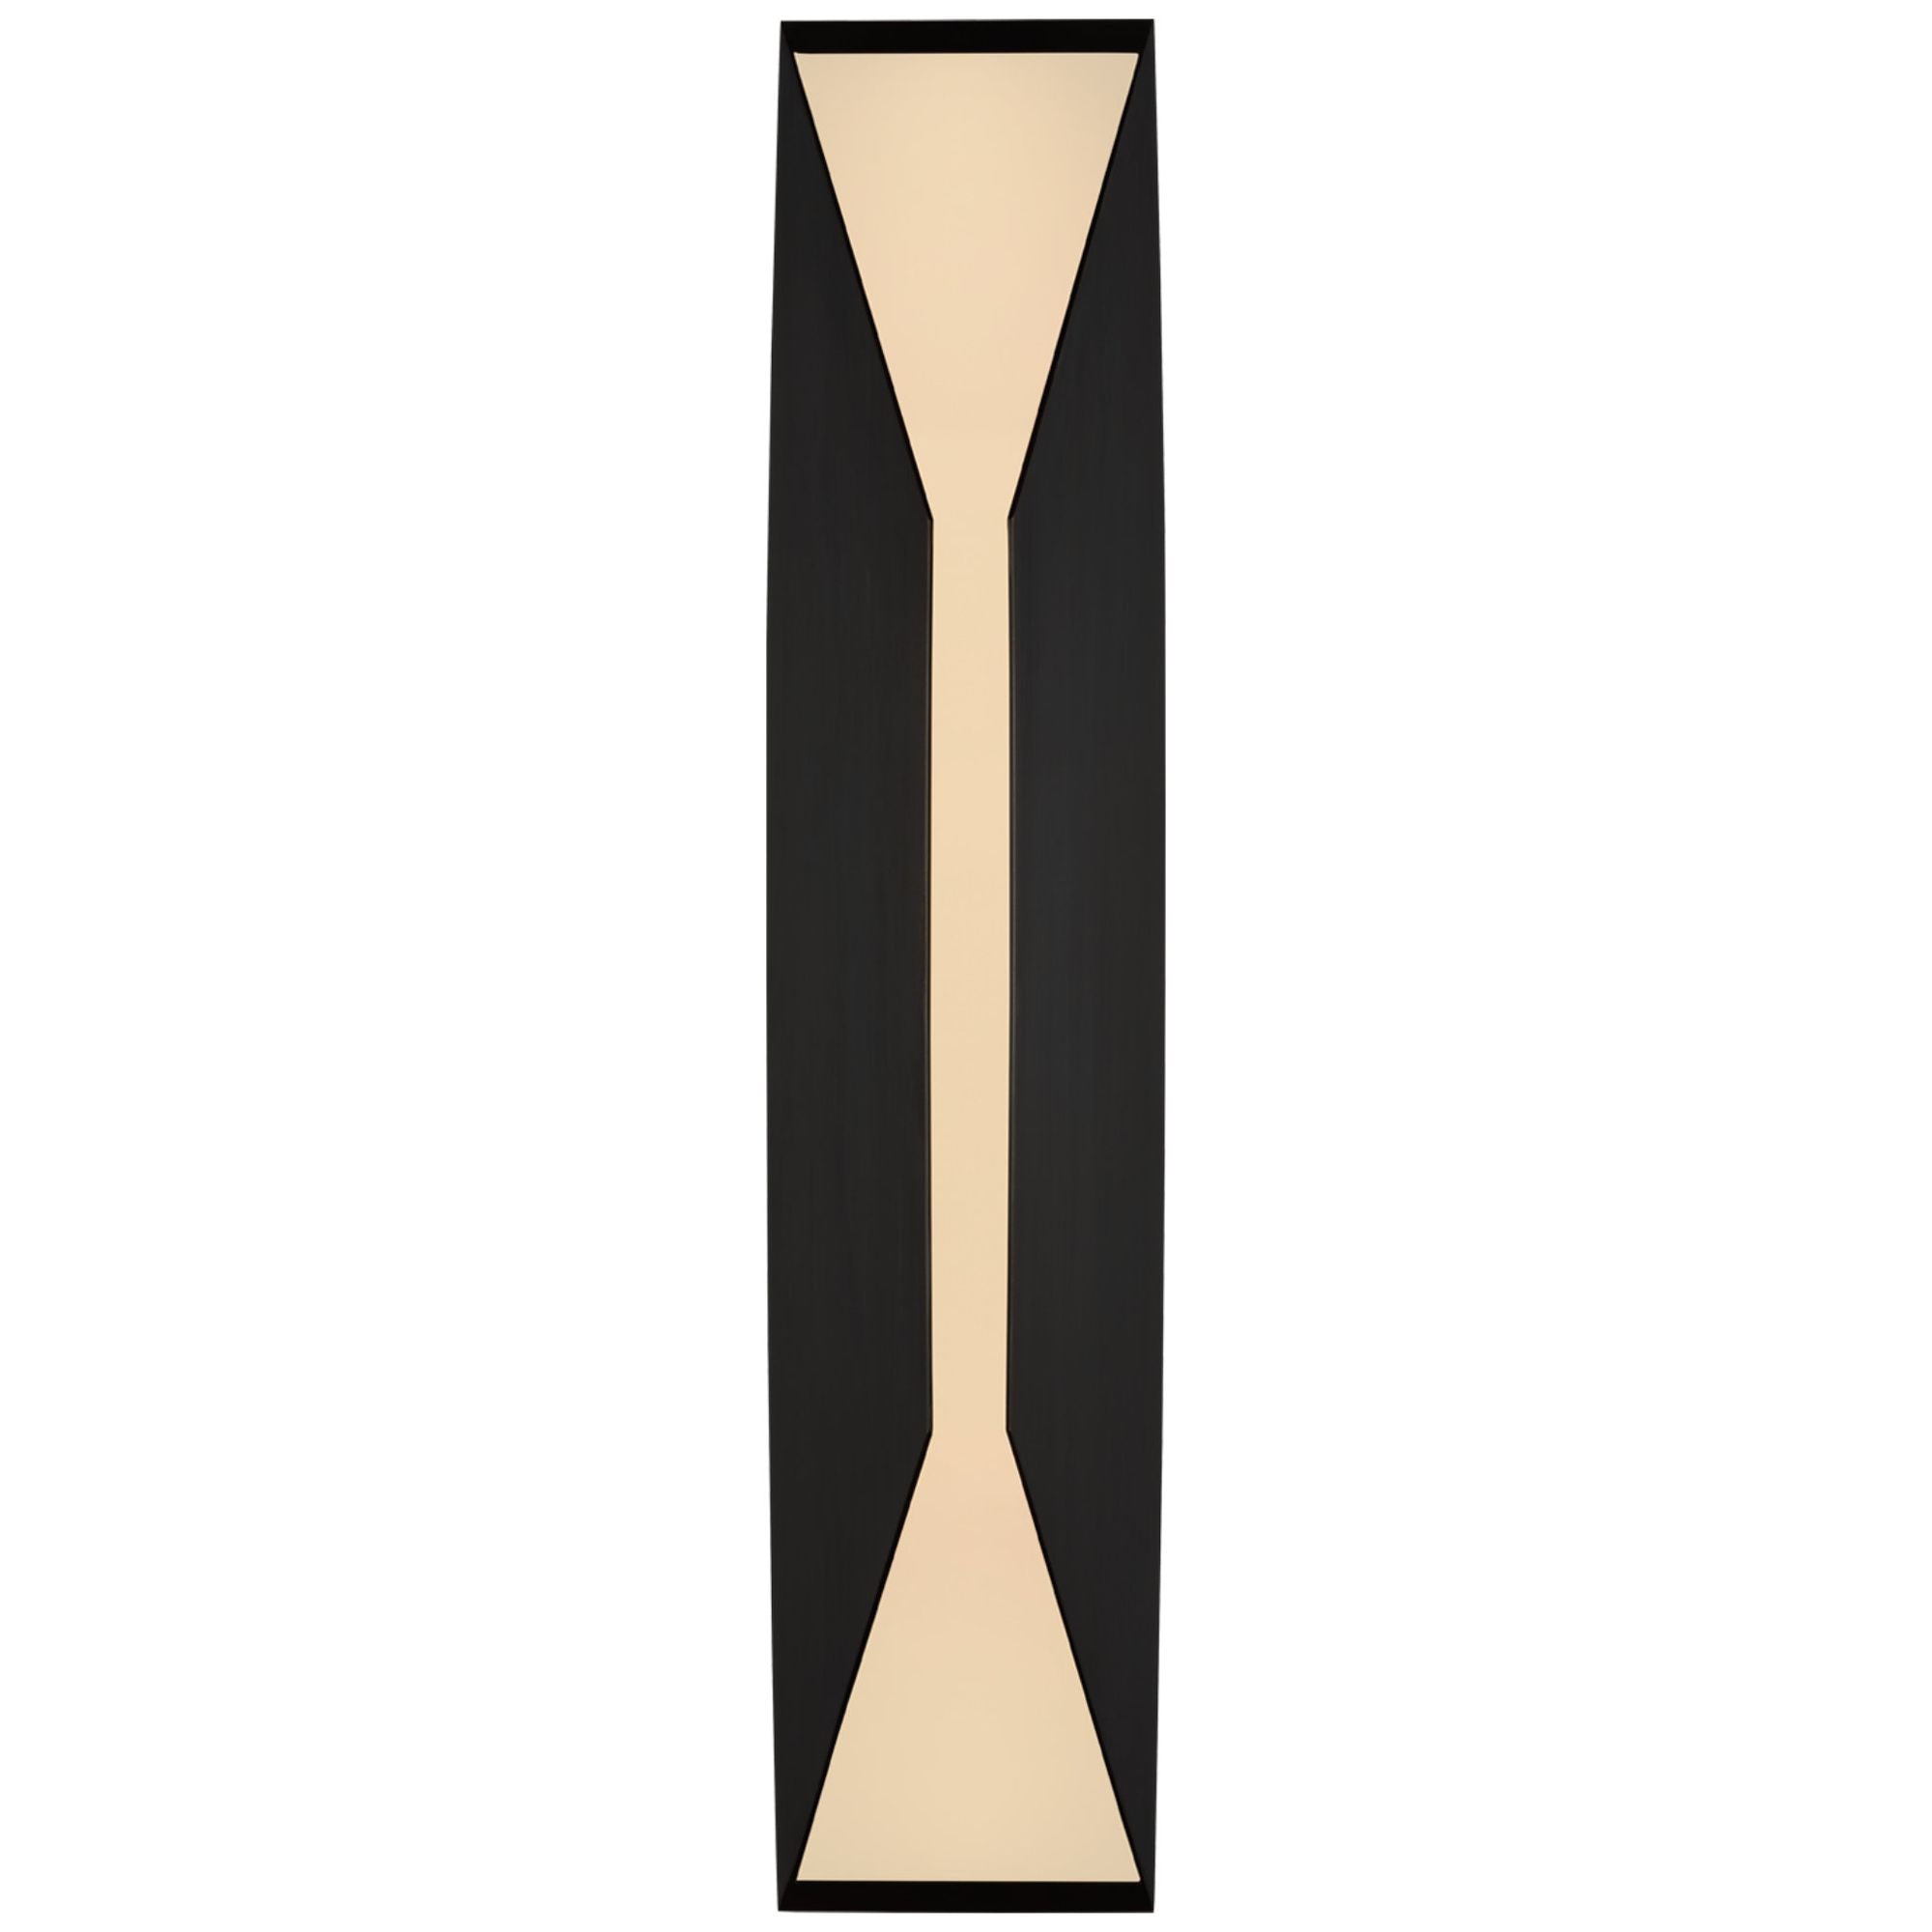 Kelly Wearstler Stretto 24" Sconce in Bronze with Frosted Glass